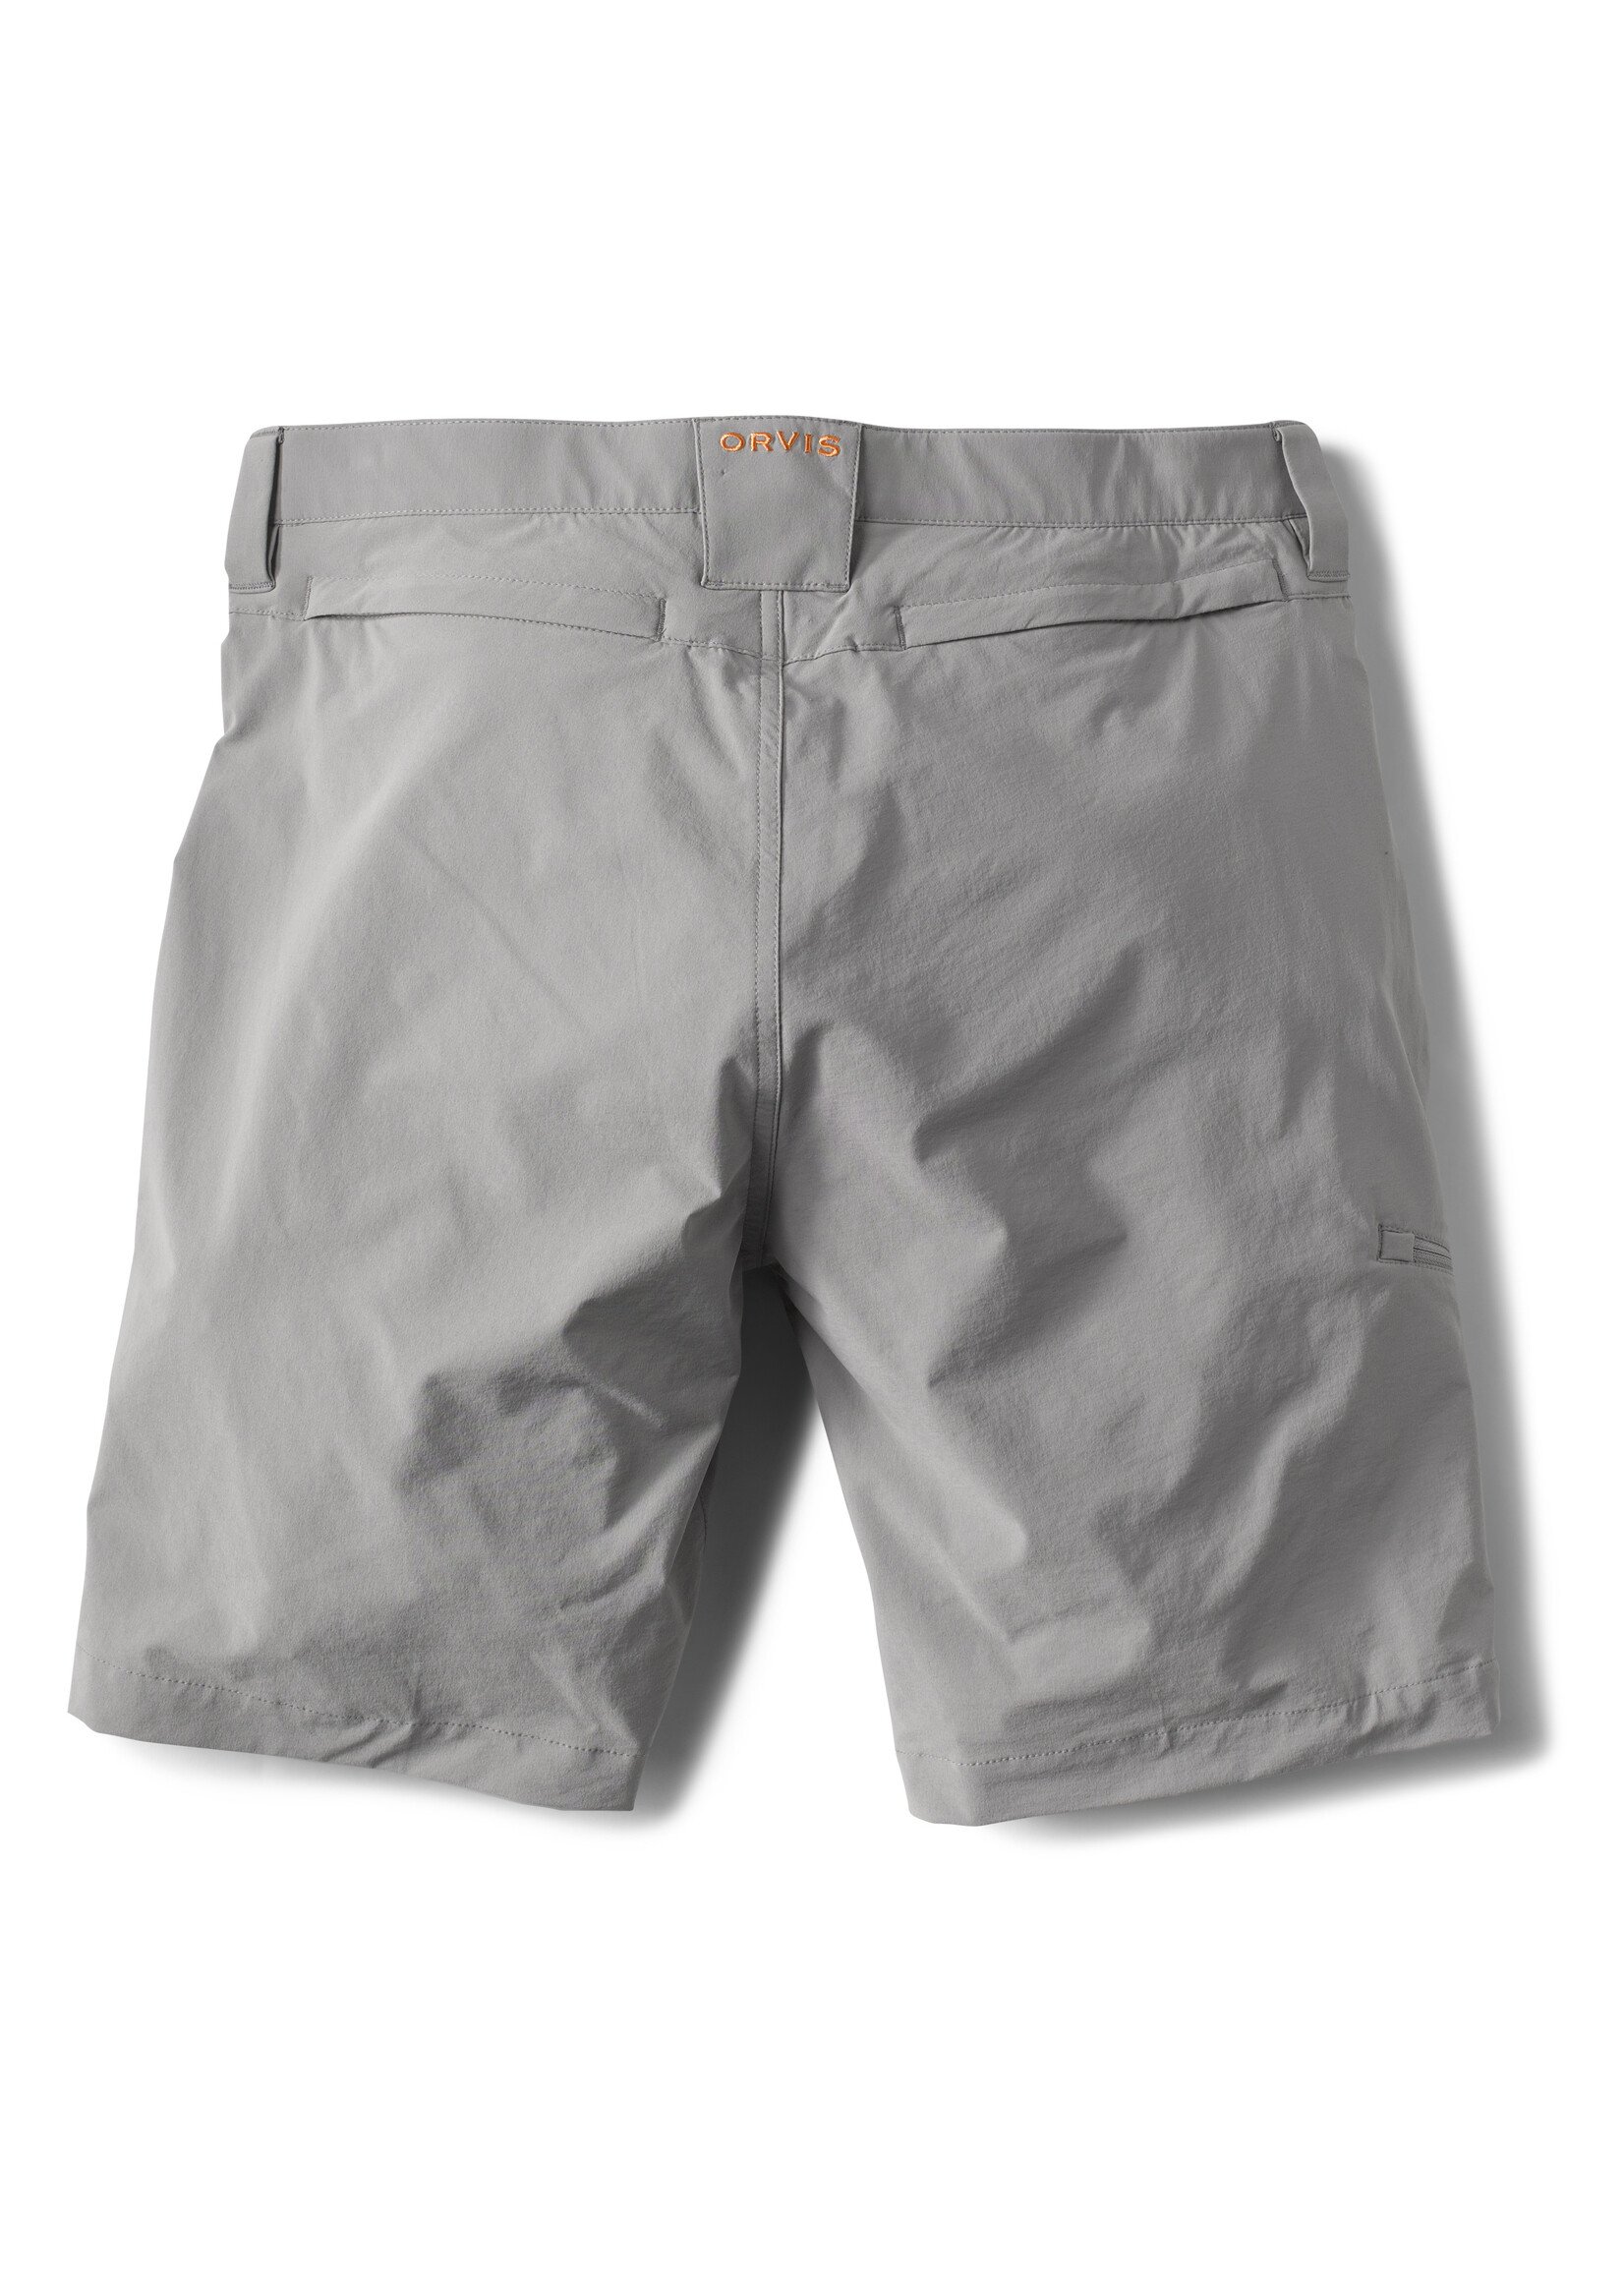 Orvis Jackson Quick-Dry Shorts, Best Fly Fishing Shorts, Buy Orvis Fly  Fishing Short Online